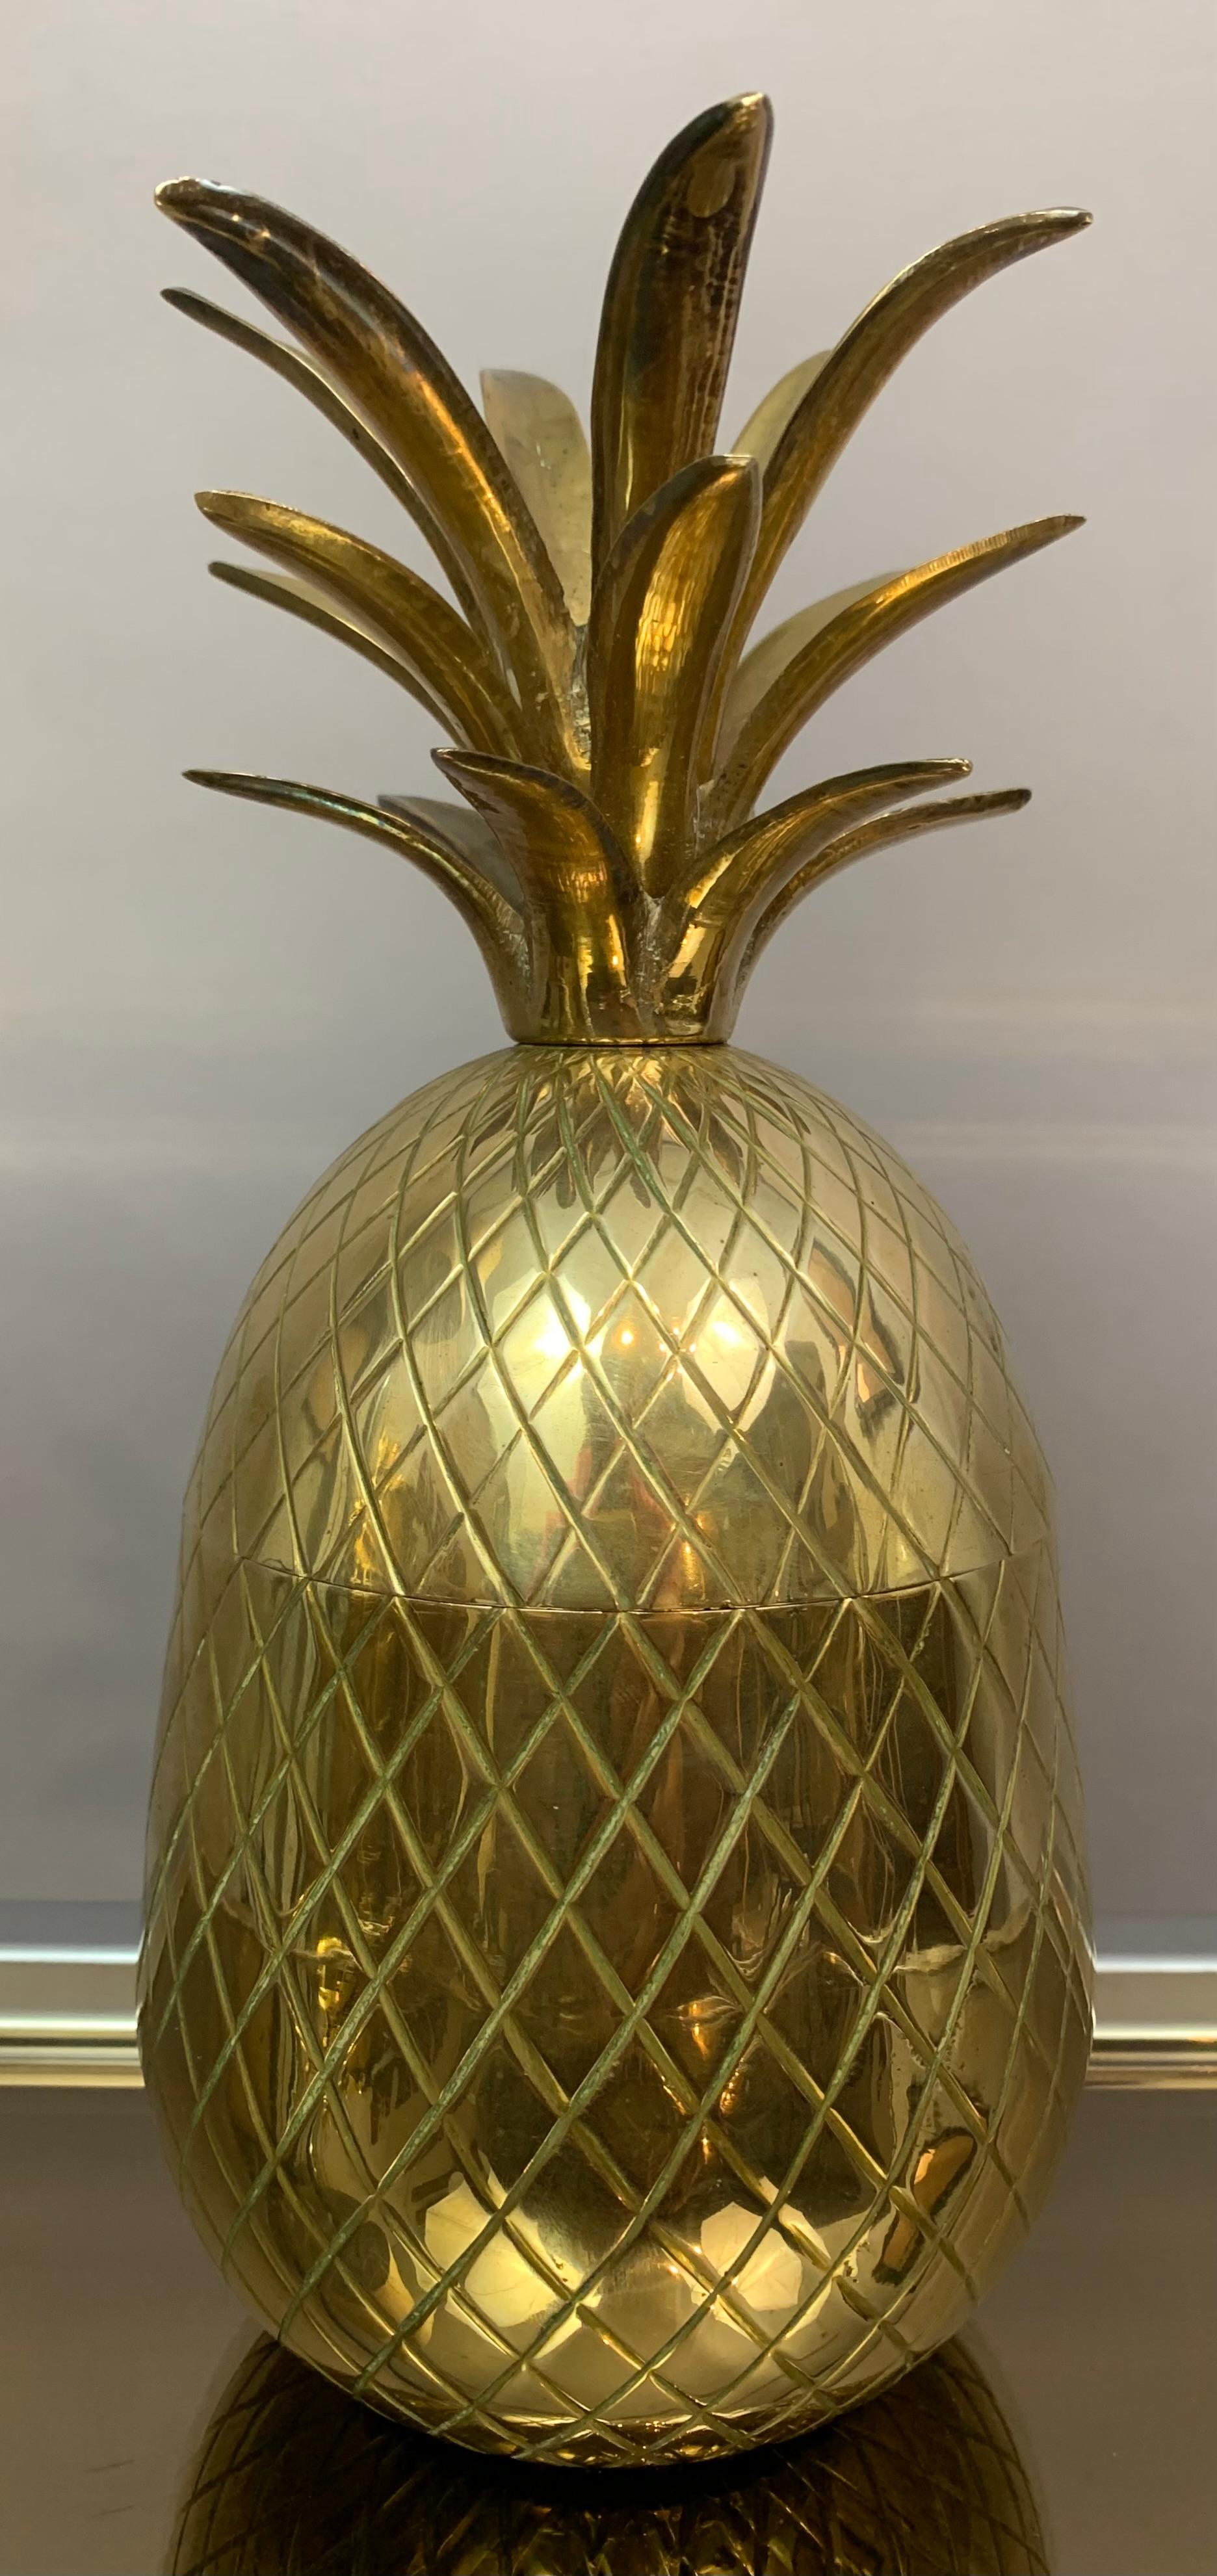 Circa 1970s Vintage Hollywood Regency polished brass pineapple ice bucket. The surface of the outside is decorated with an incised diamond pattern. The ice bucket separates in two allowing access to whatever you decide to keep inside. 

In very